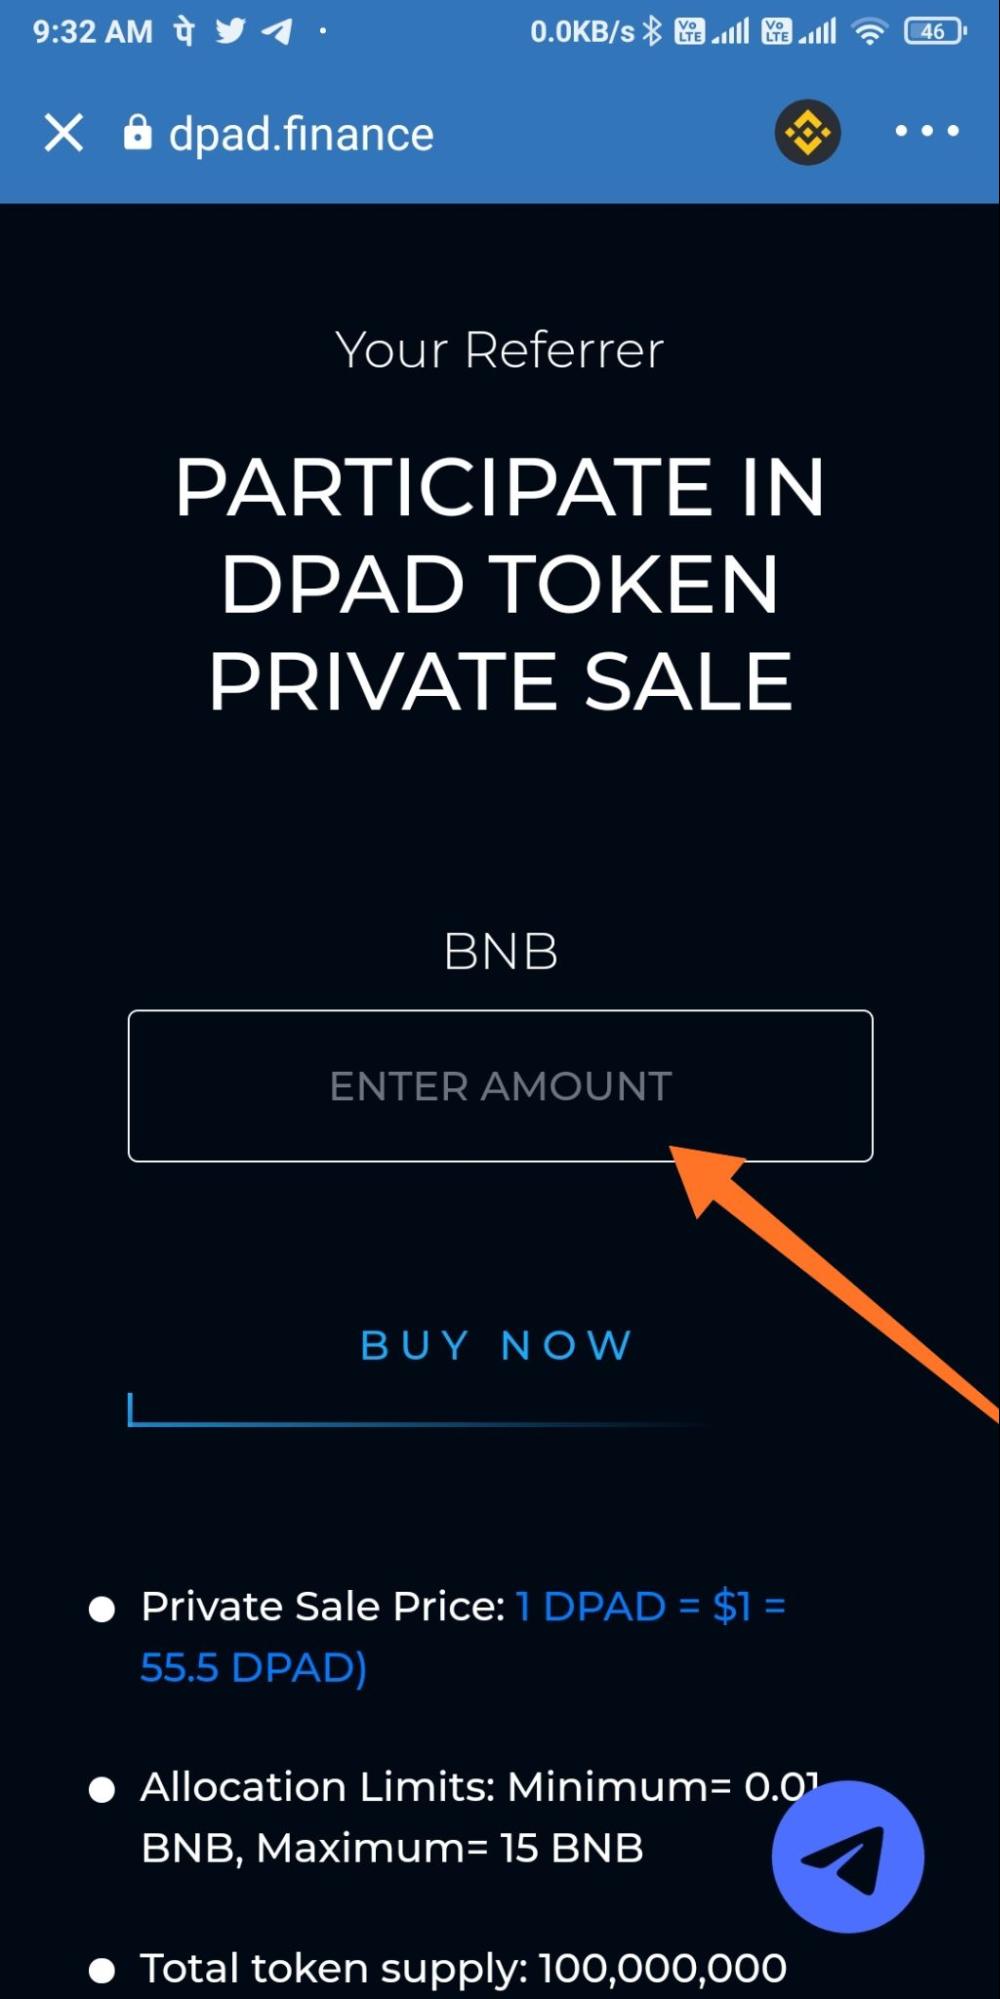 dpad-token-private-sale-enter-BNB-amount-mobile-view